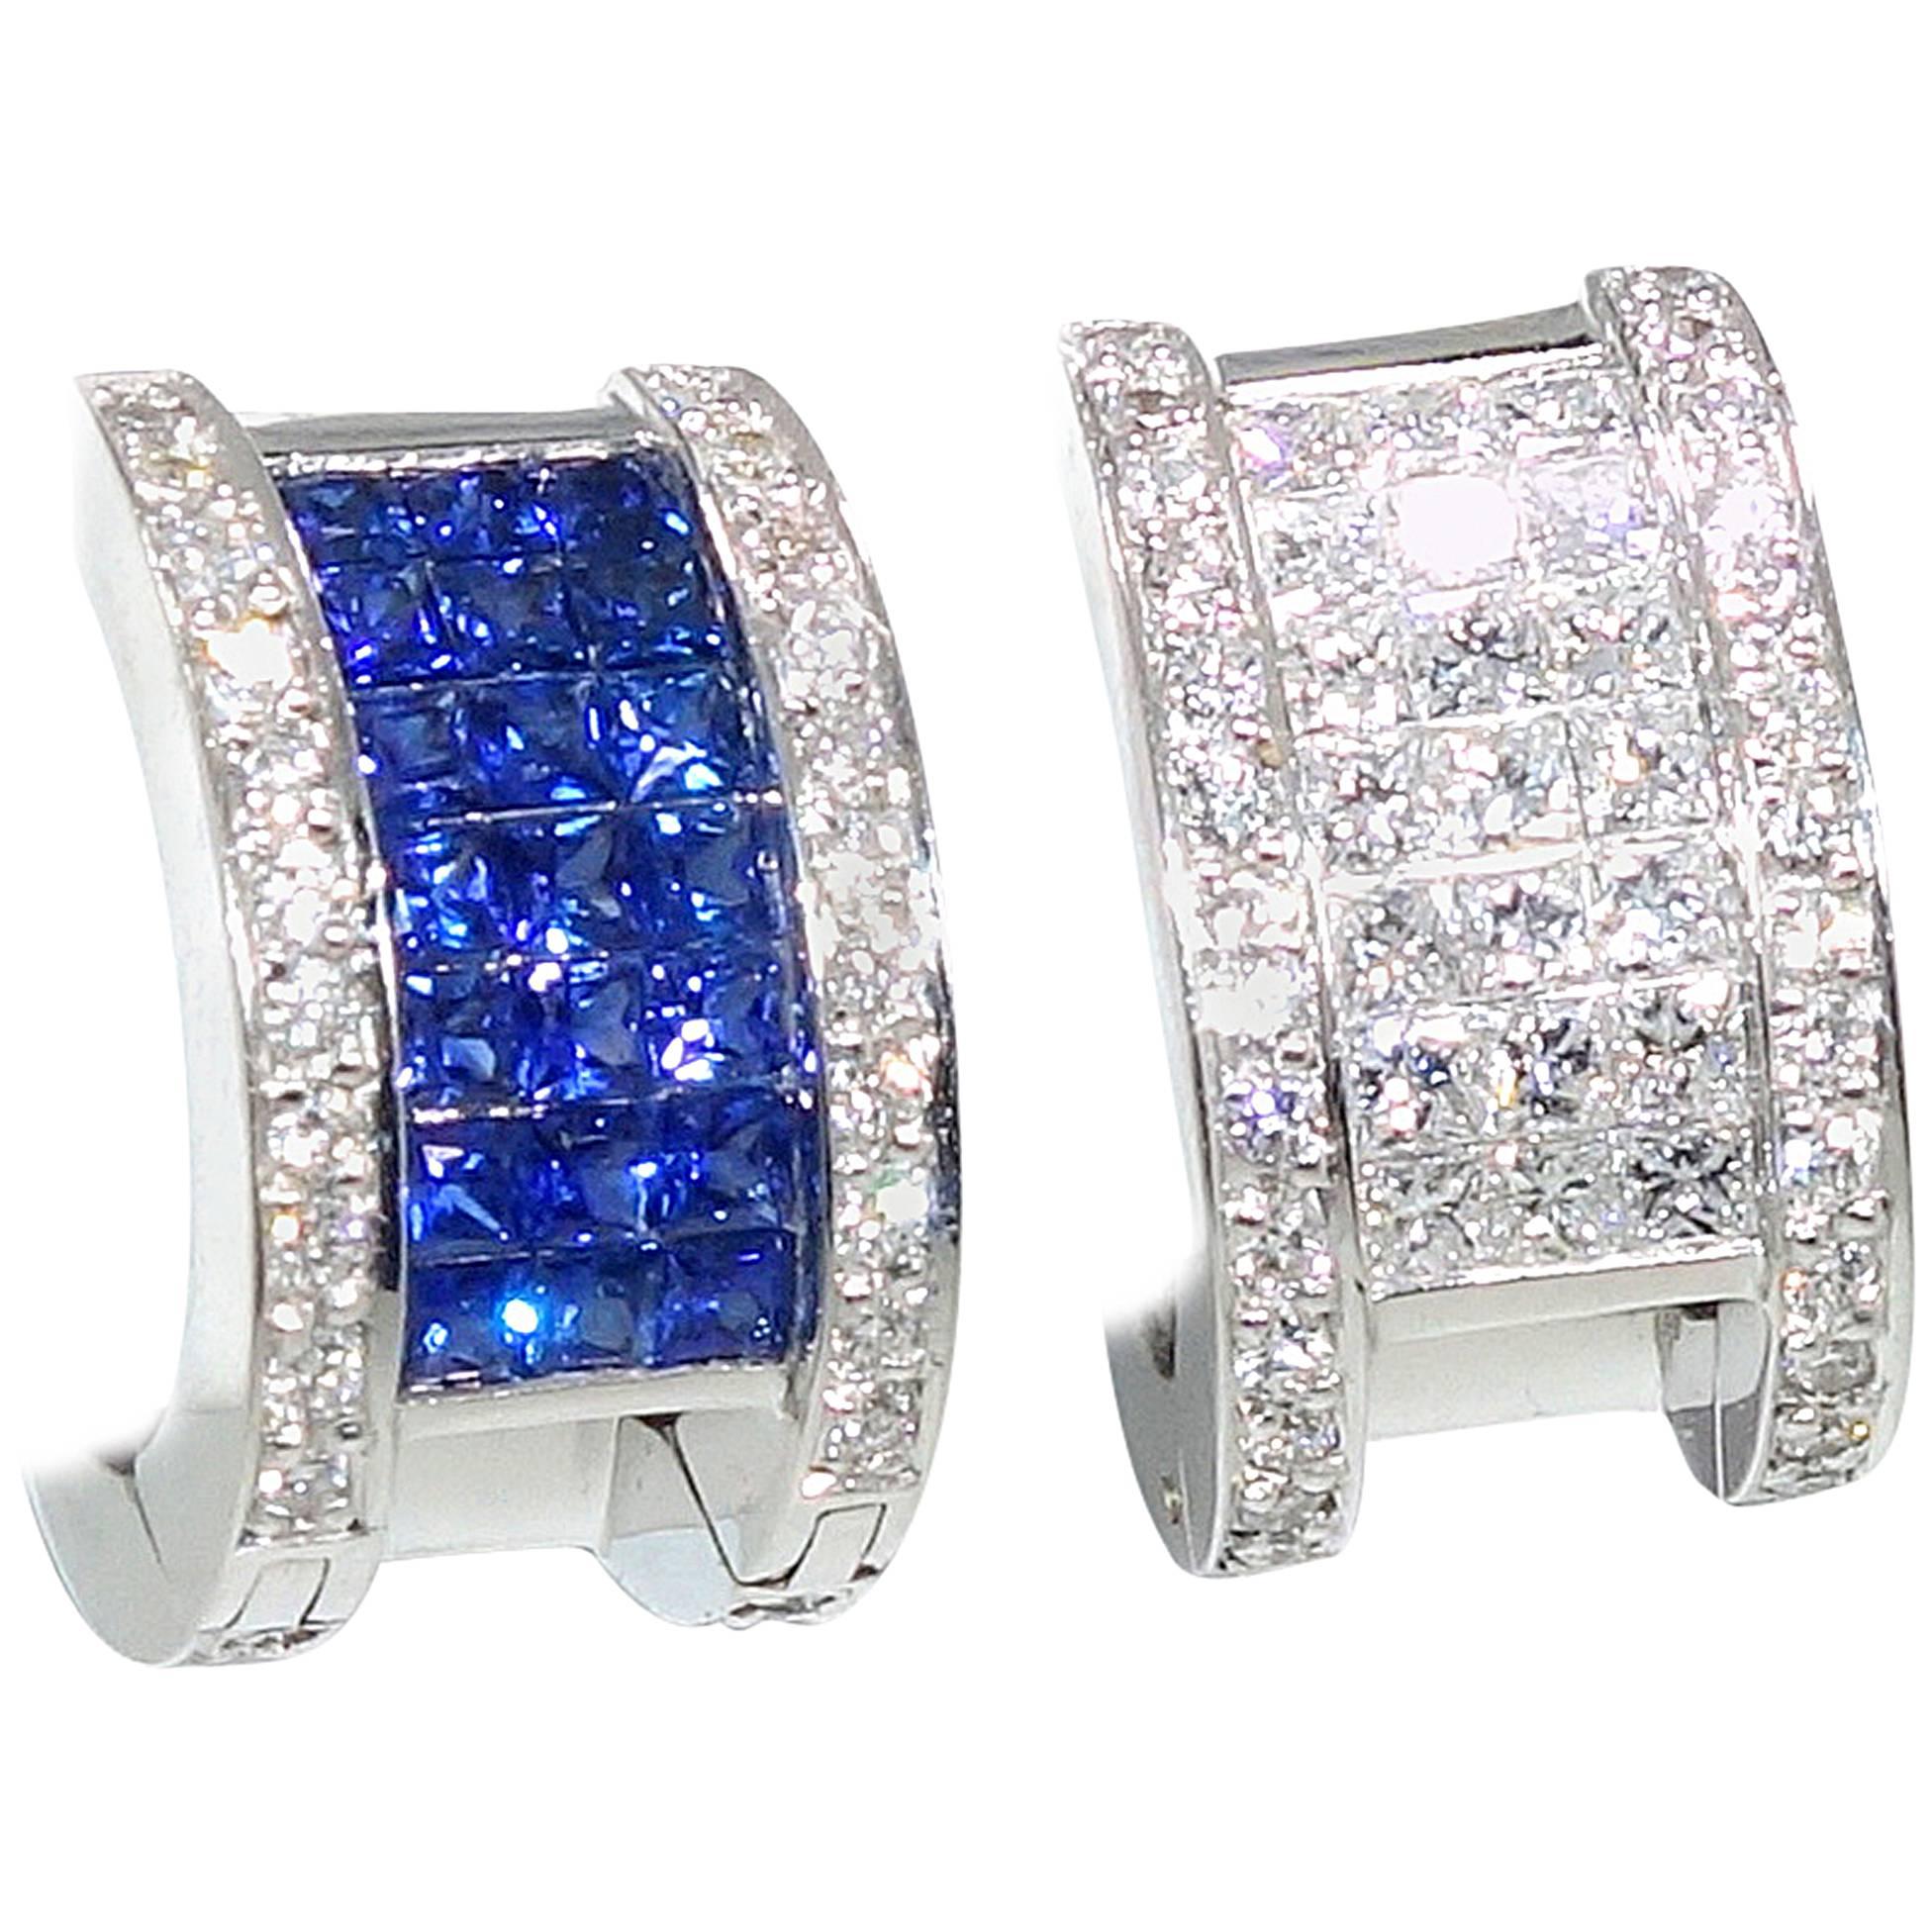 Invisibly Set Sapphire Diamonds Gold "Reversible" Earrings